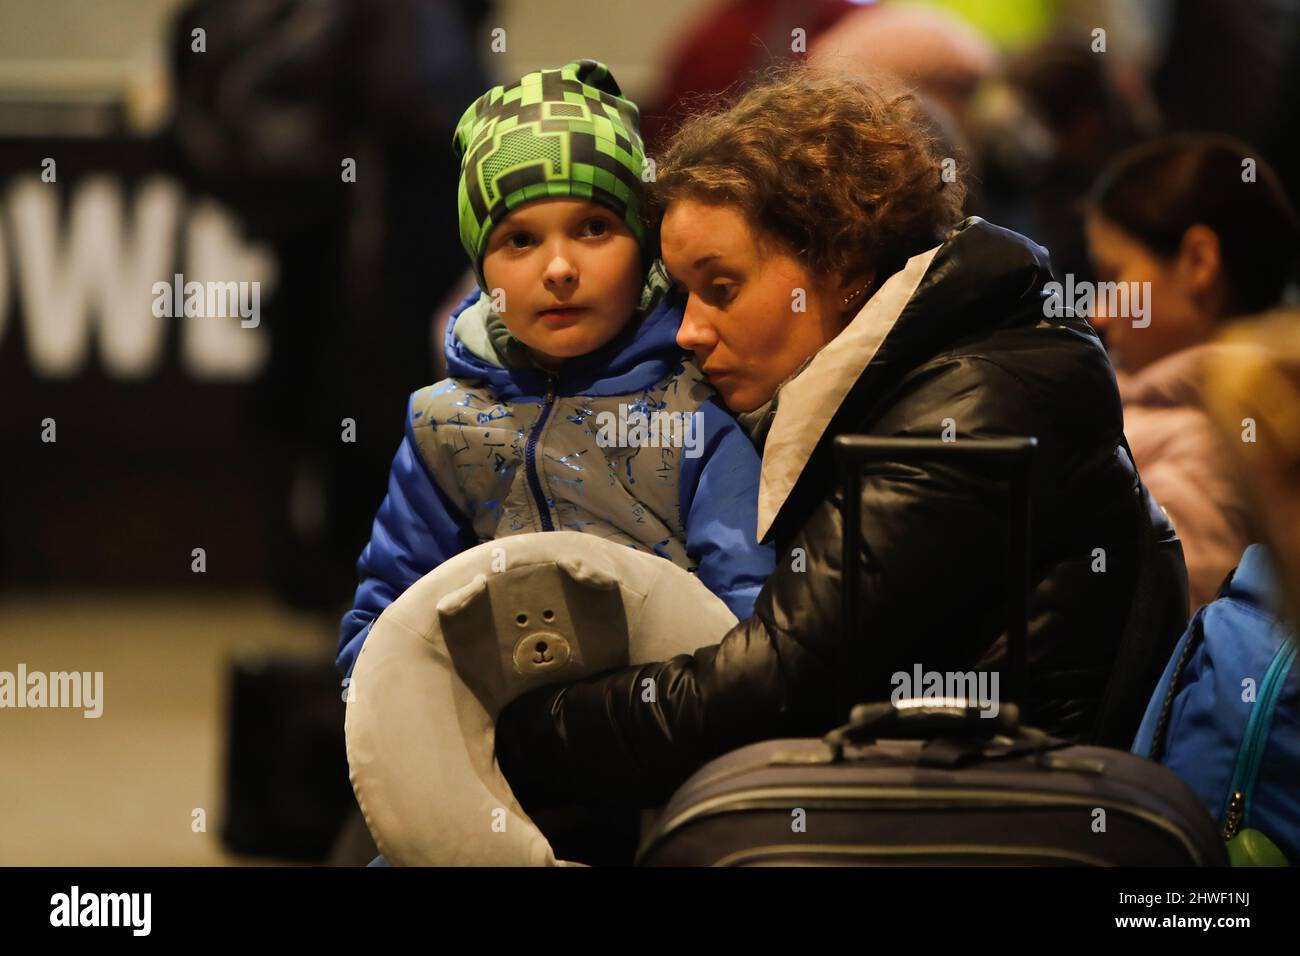 Warsaw, Warsaw, Poland. 5th Mar, 2022. At zero degree Celsius, a Ukrainian mother takes her son into her arms to keep him warm, inside a refugee centre in Warsaw, as floods of refugees escape from Ukraine to Poland, following the Russian invasion. According to the United Nations, the war has been posing threats to Children's mental health and personal safety, with nearly 7 deaths of kids reported so far. (Credit Image: © Daniel Ceng Shou-Yi/ZUMA Press Wire) Stock Photo